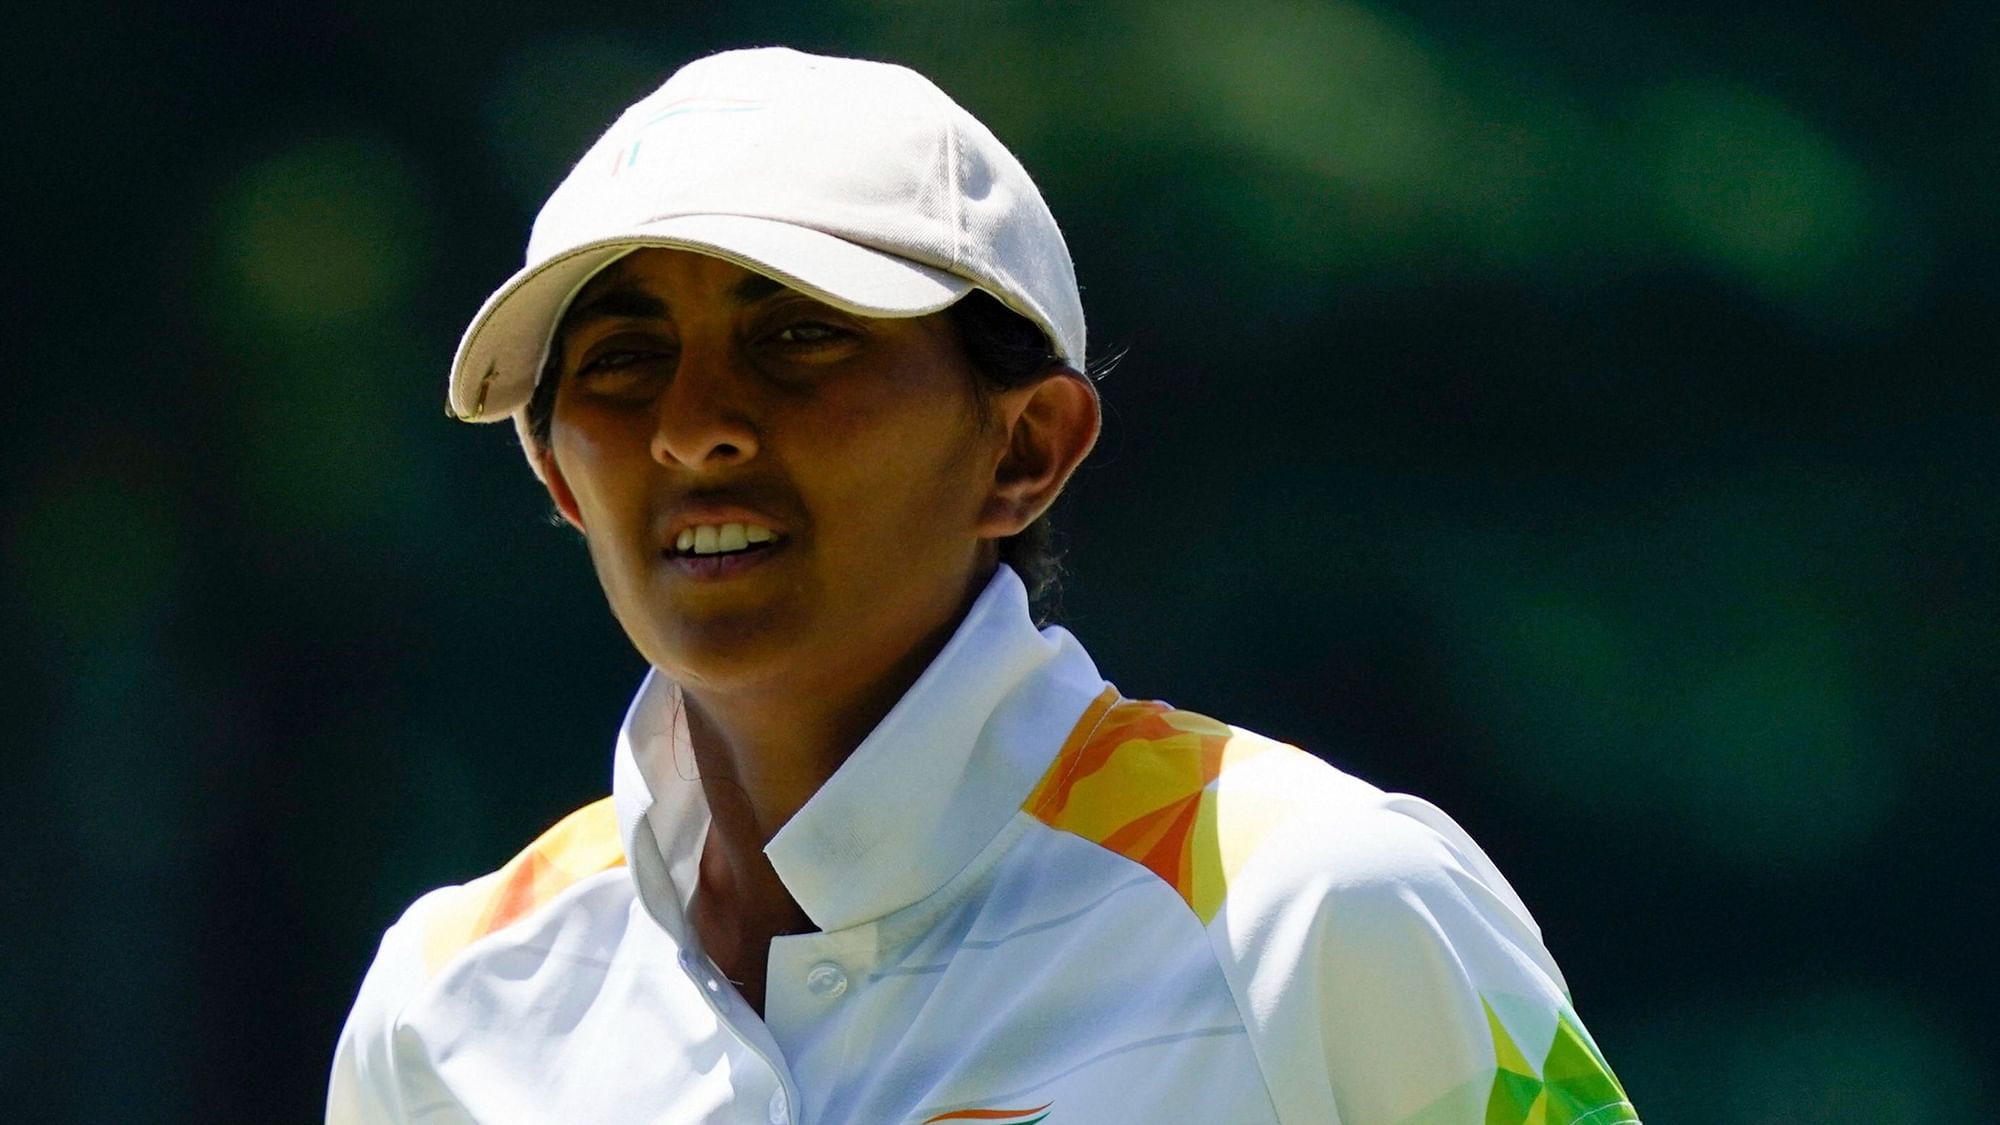 <div class="paragraphs"><p>Aditi Ashok finished fourth in the women's golf event at the 2020 Tokyo Olympics.</p></div>